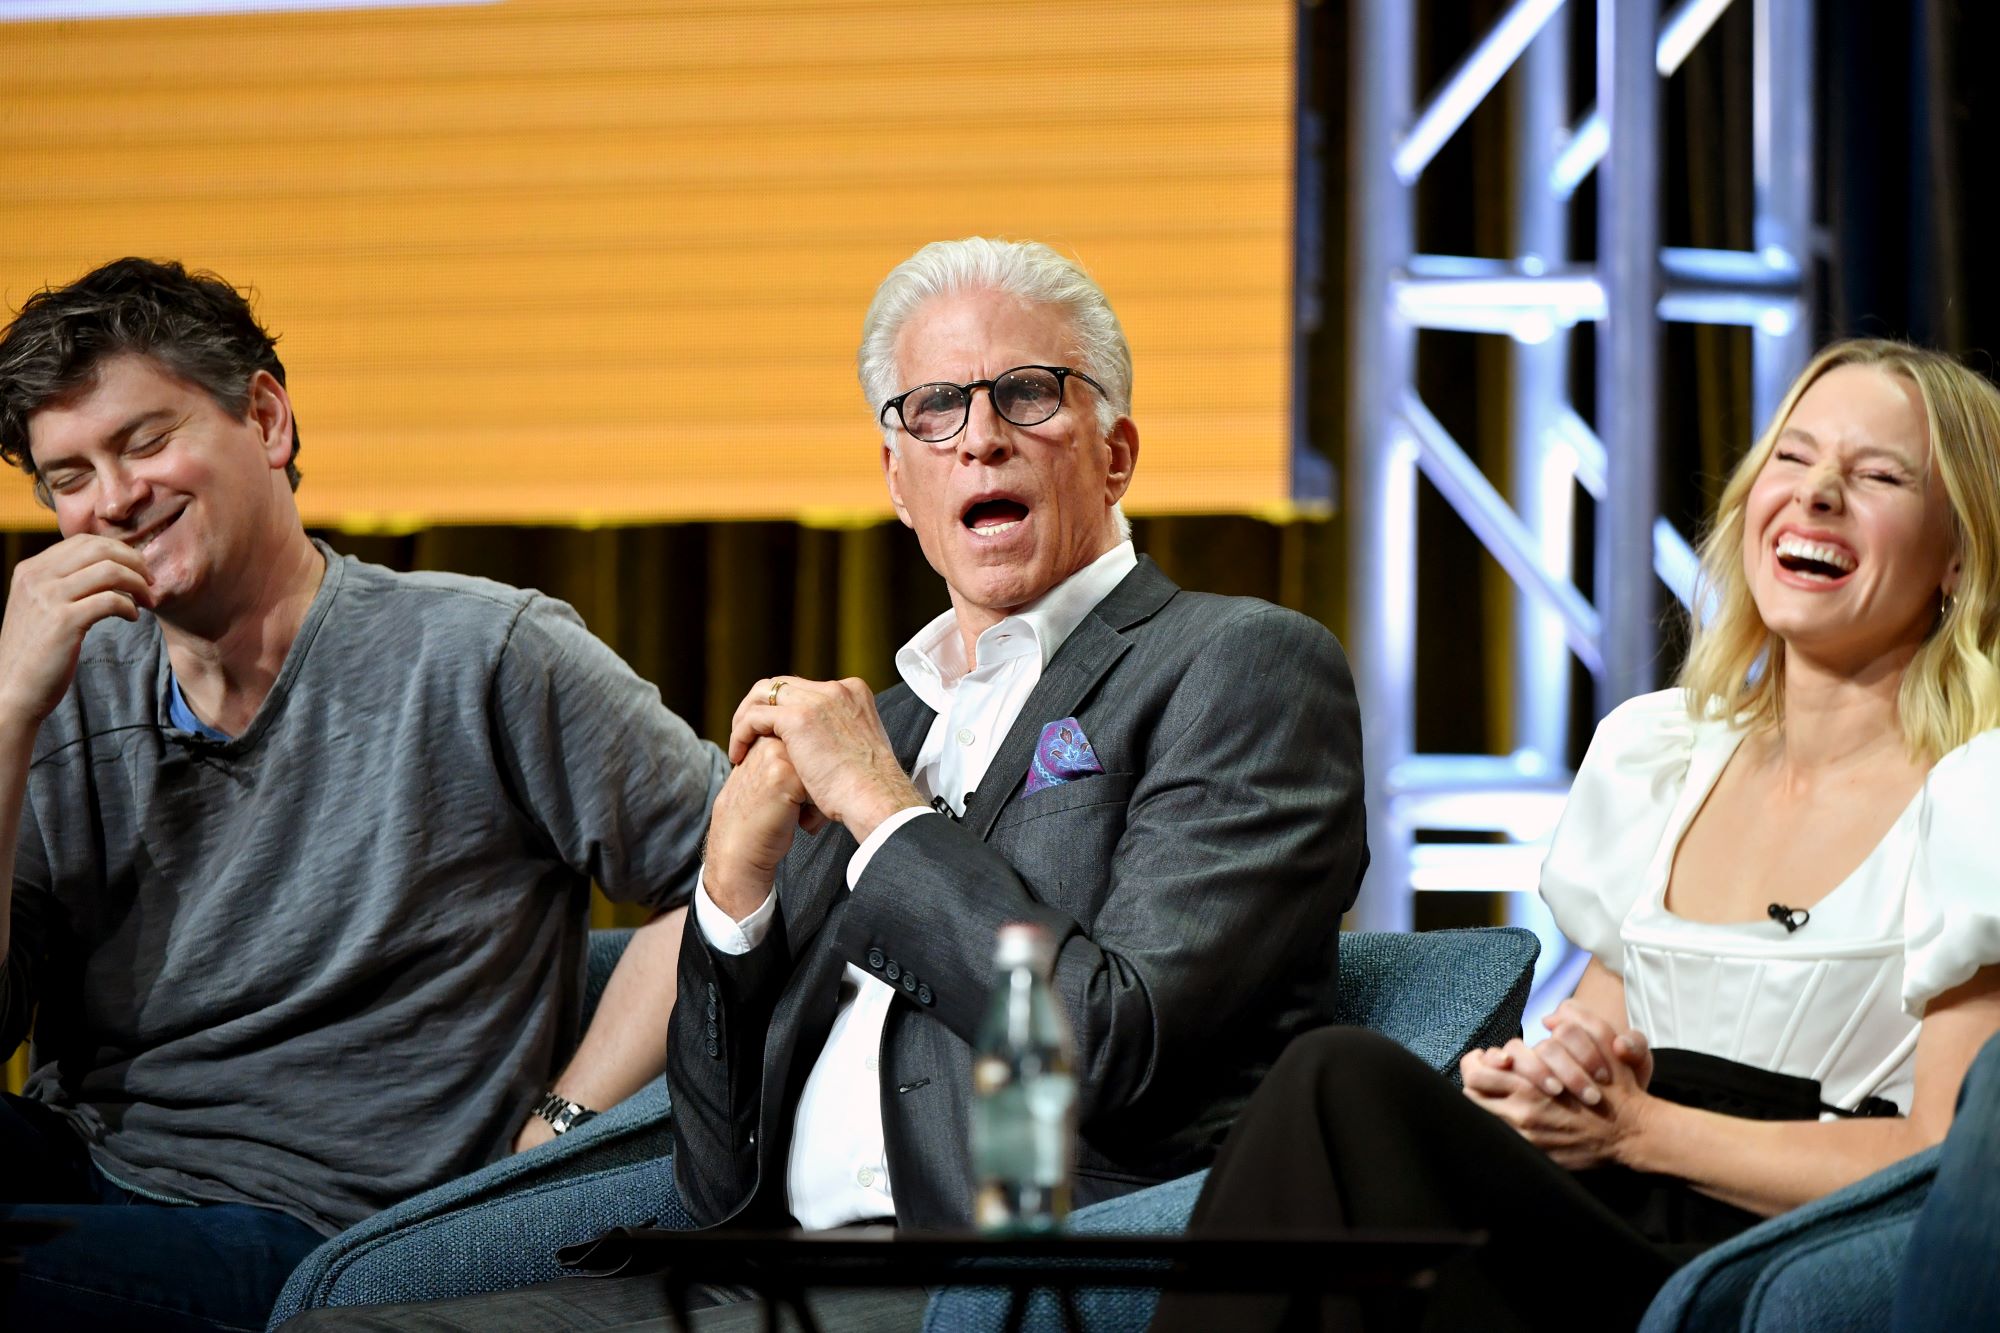 Michael Schur, Ted Danson, and Kristen Bell of 'The Good Place' speaking at an NBC 2019 Summer TCA Press Tour segment